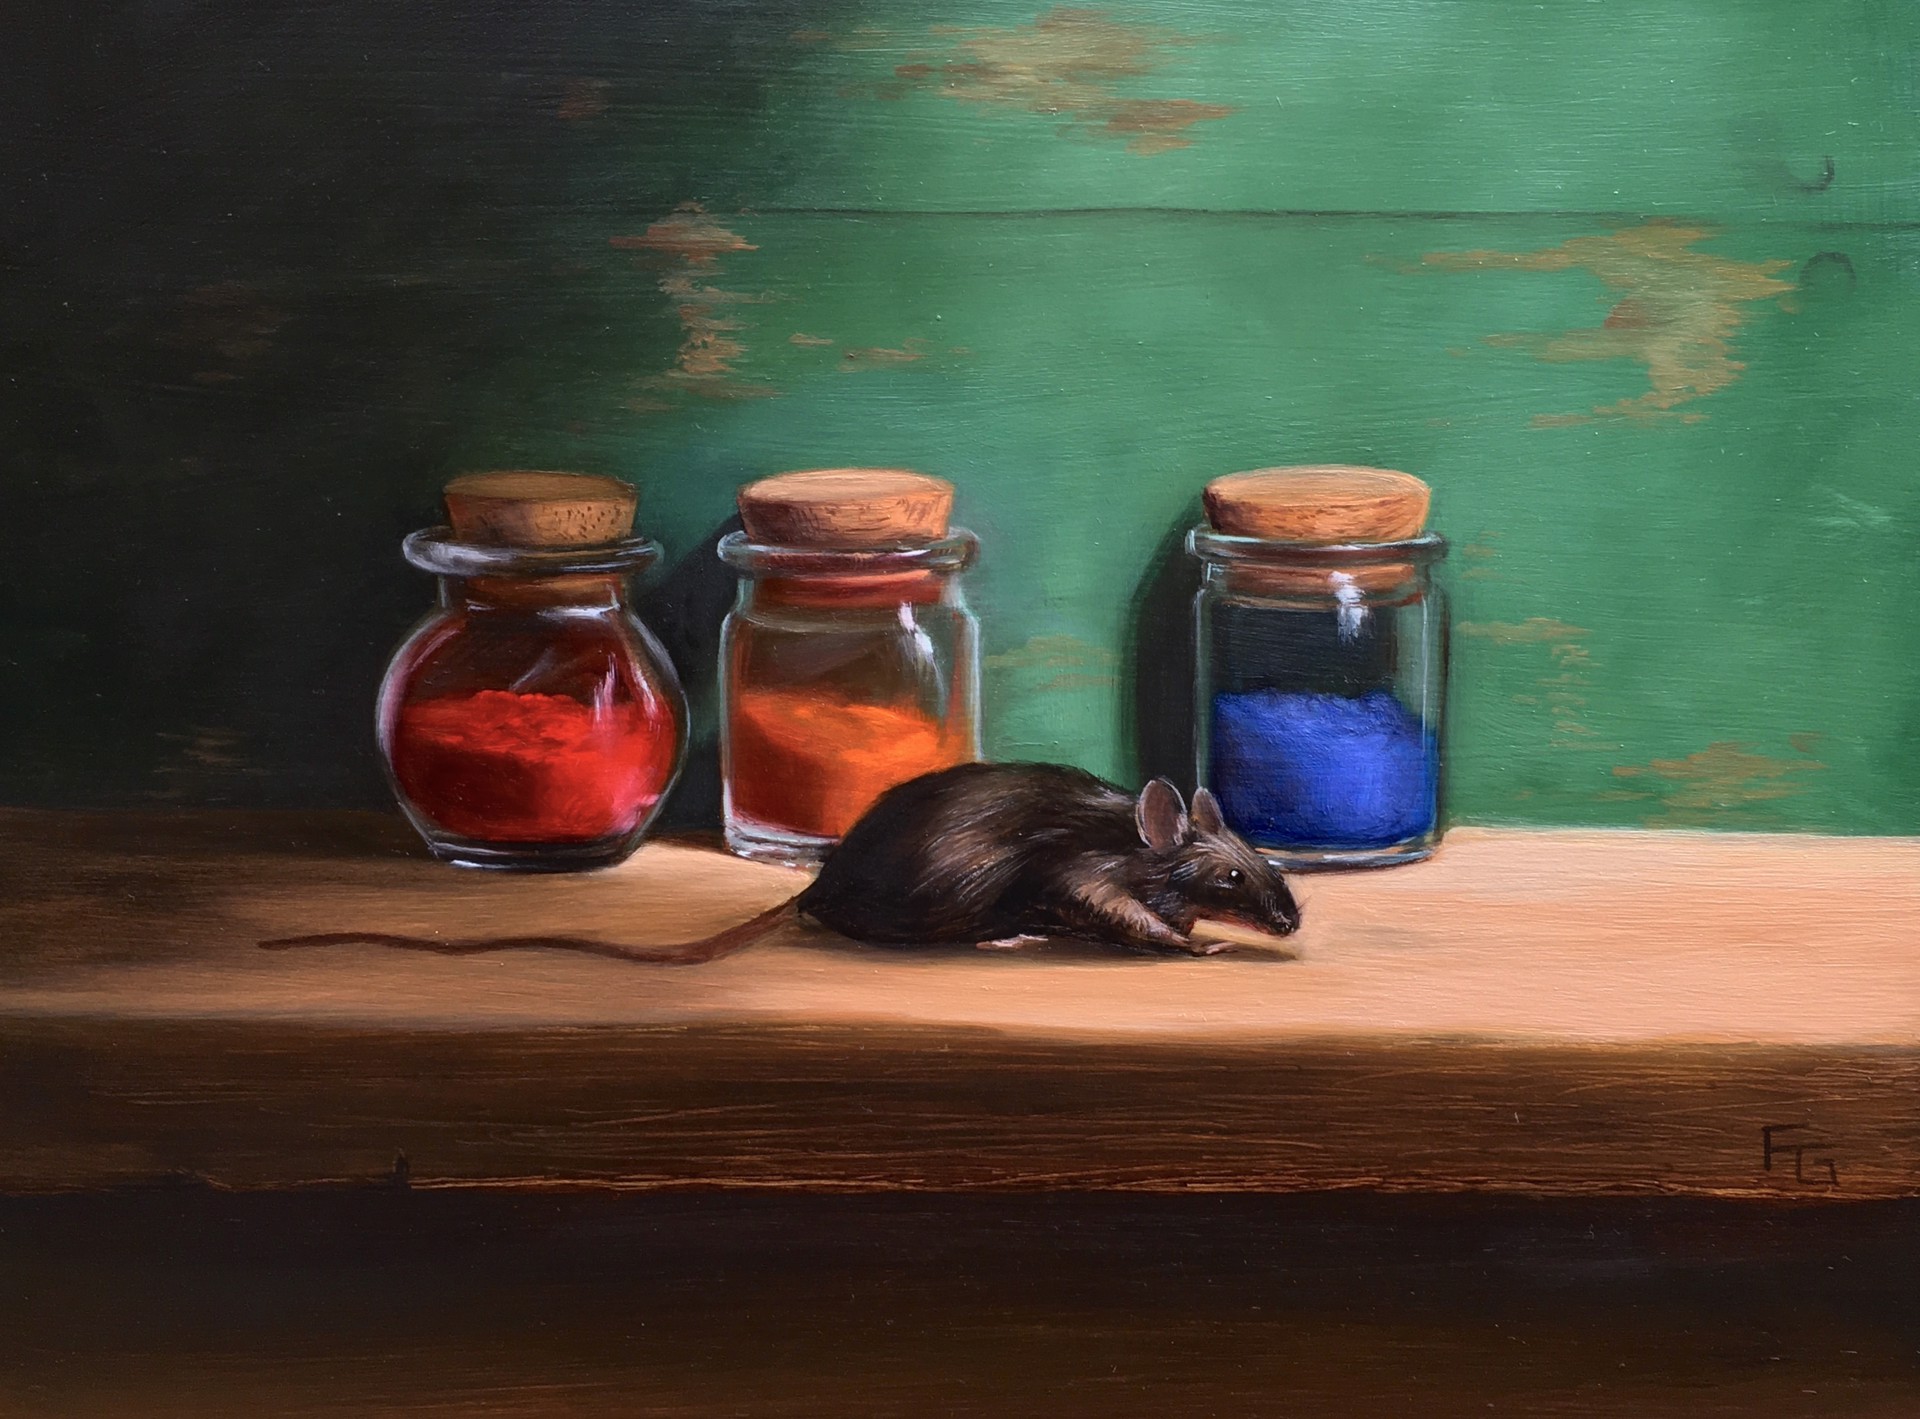 Mouse with Pigments by Frankie Gollub